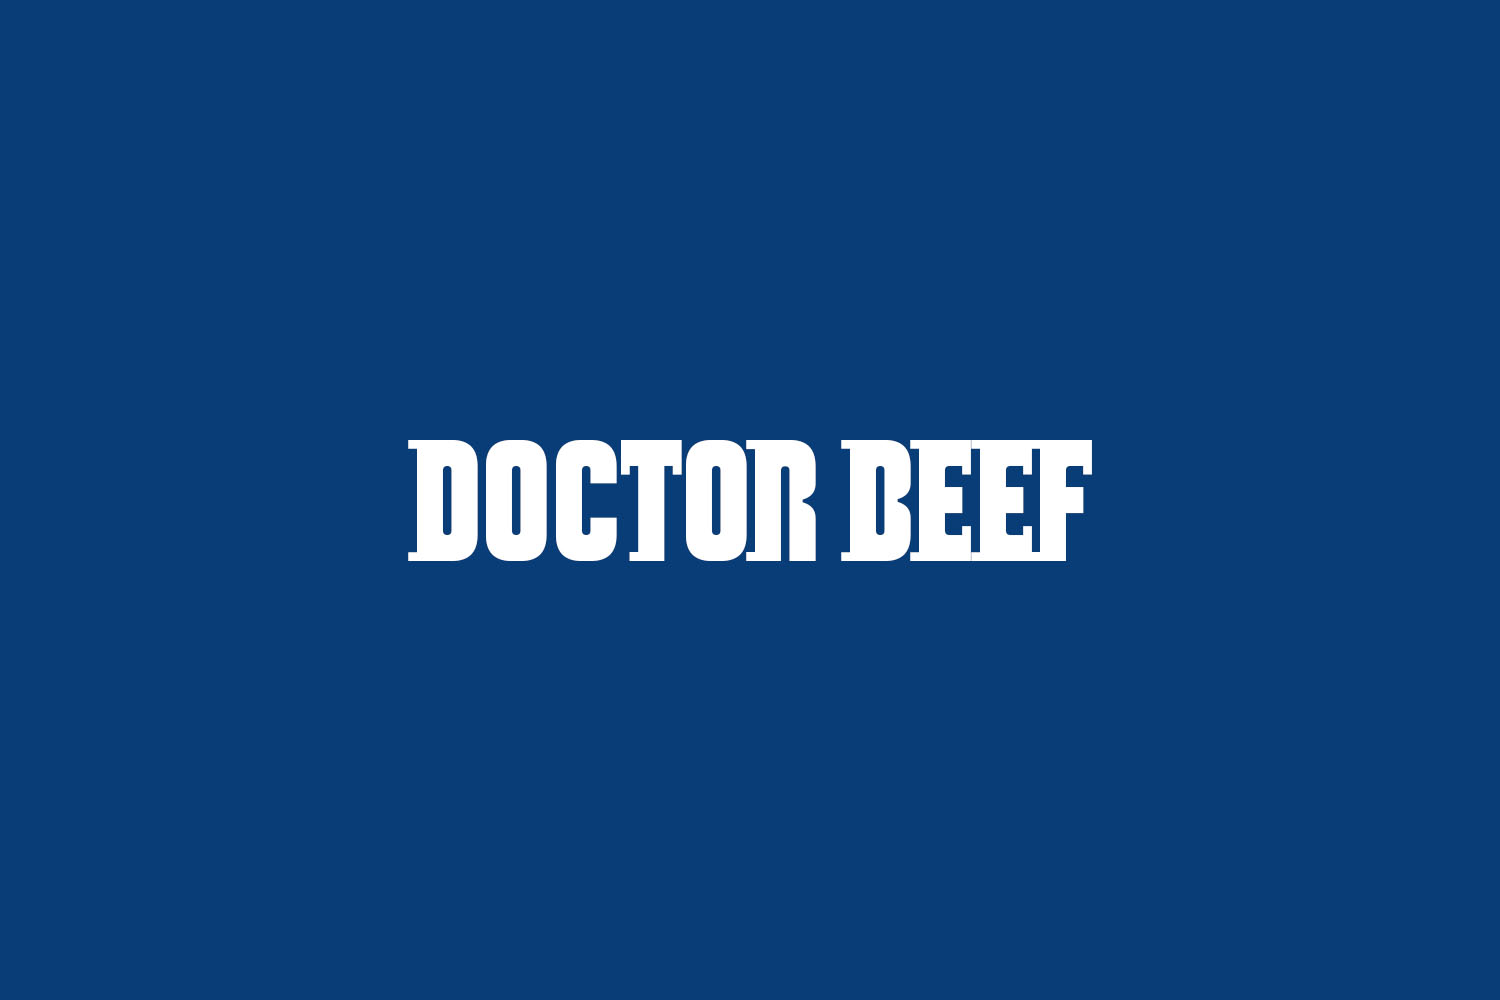 Doctor Beef Free Font